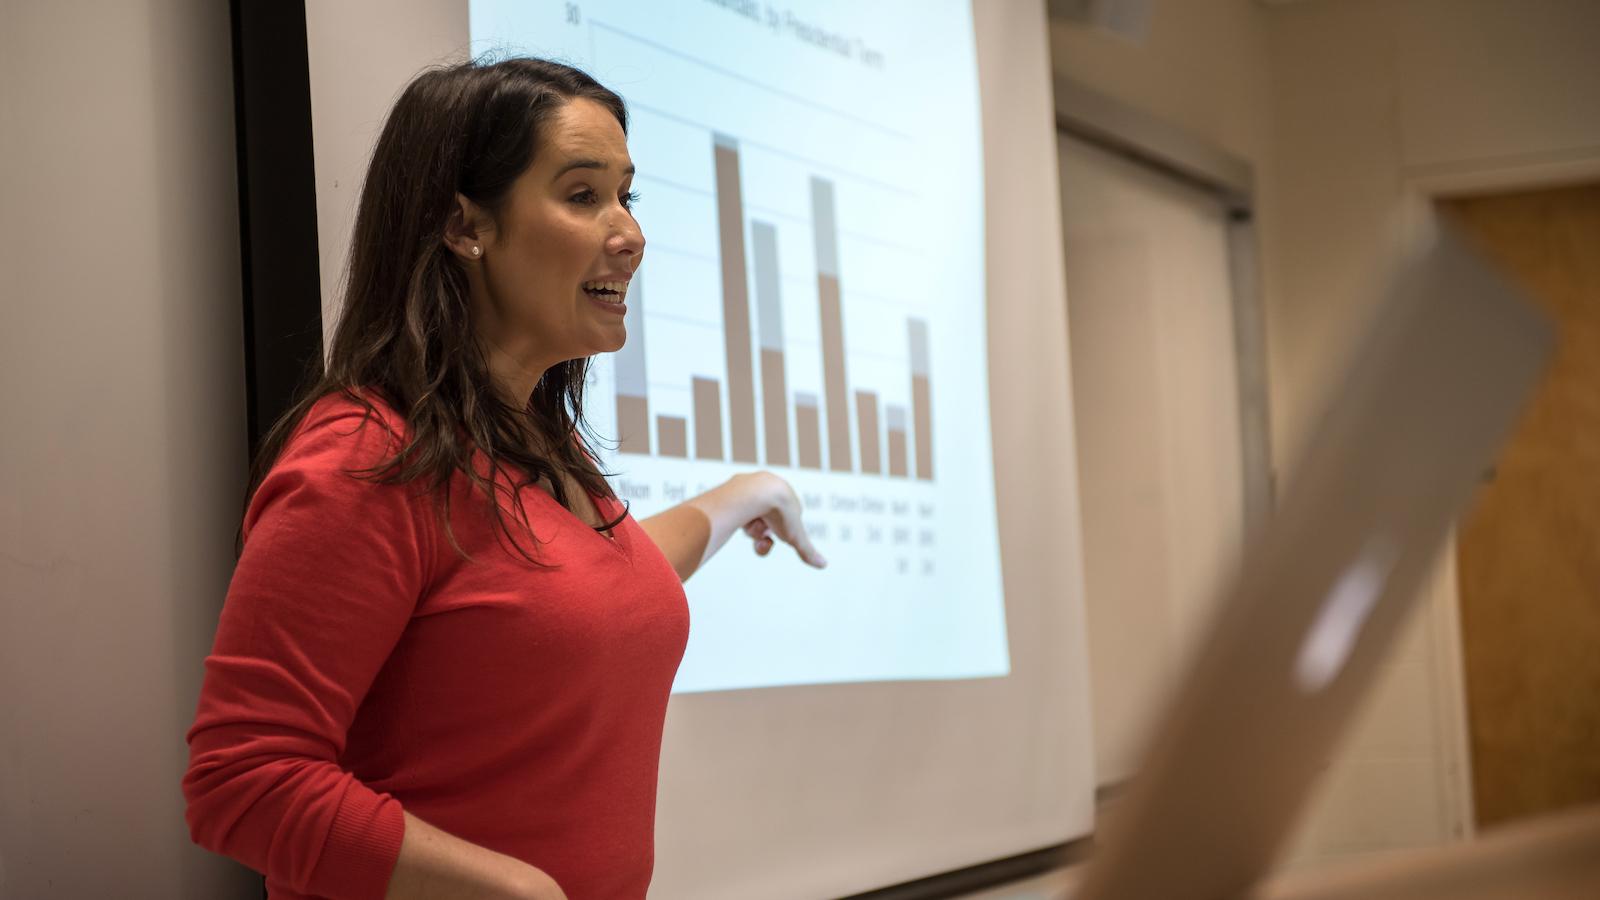 Professor Jenny Garcia pointing at a bar graph on the screen.